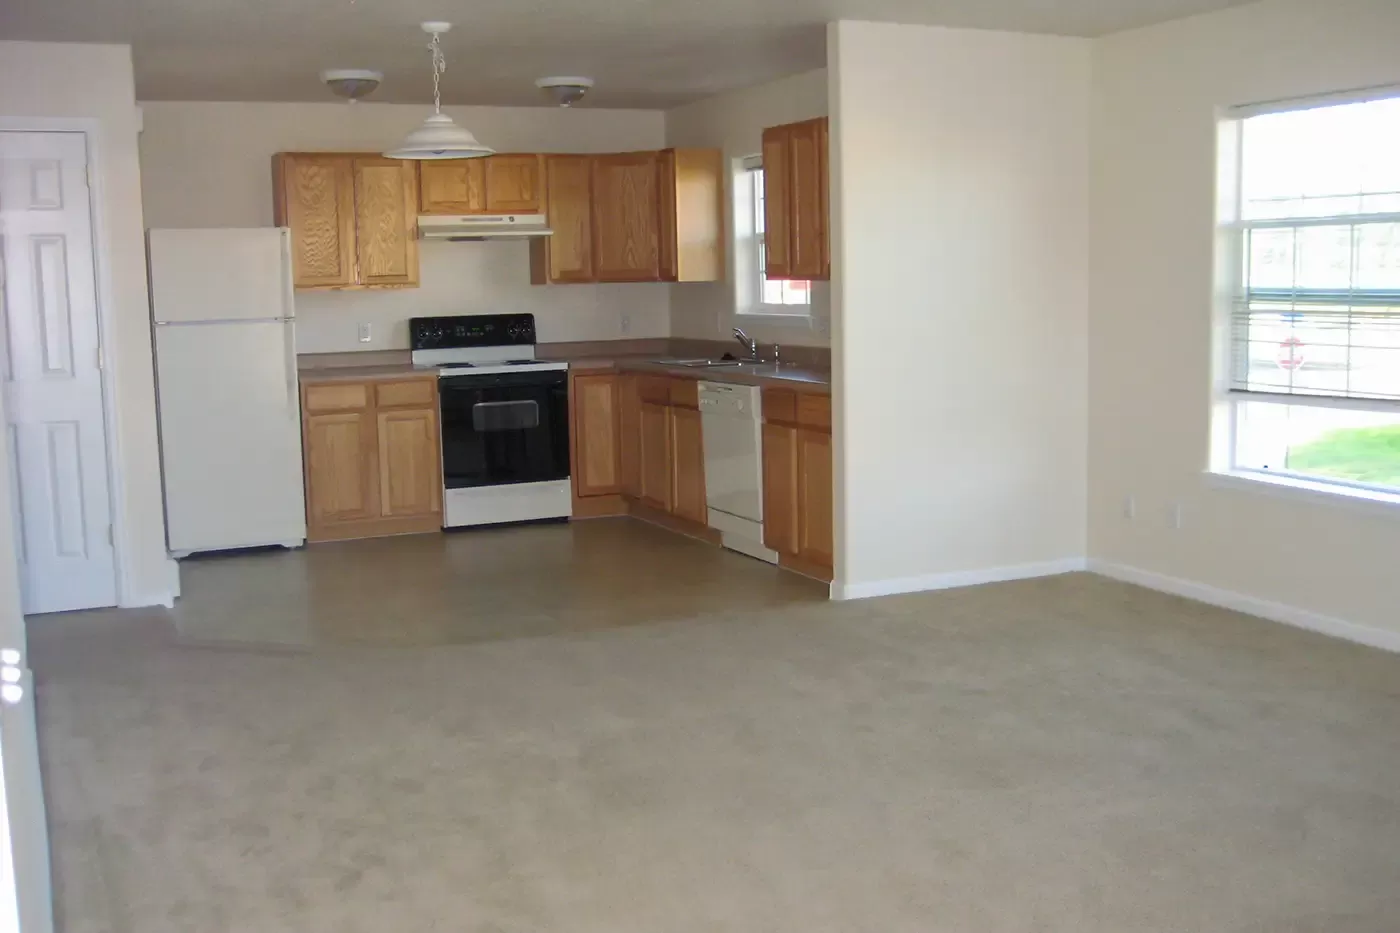 Photo of the interior at Linden Pointe apartments in Orchard Mesa